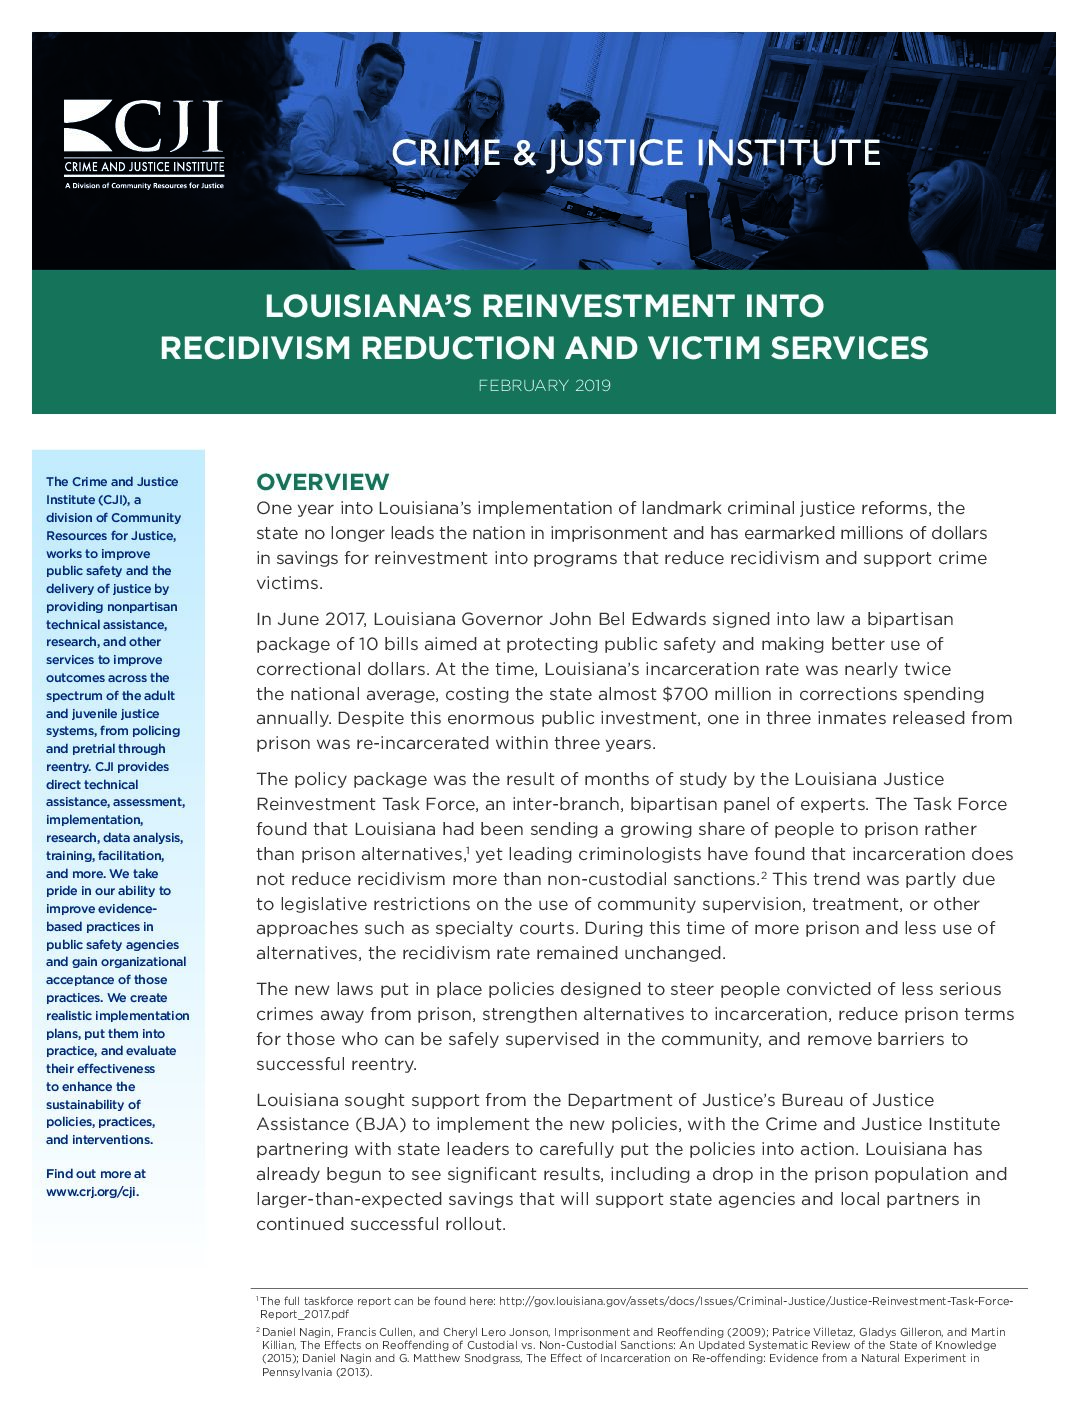 Louisiana’s Reinvestment into Recidivism Reduction and Victim Services